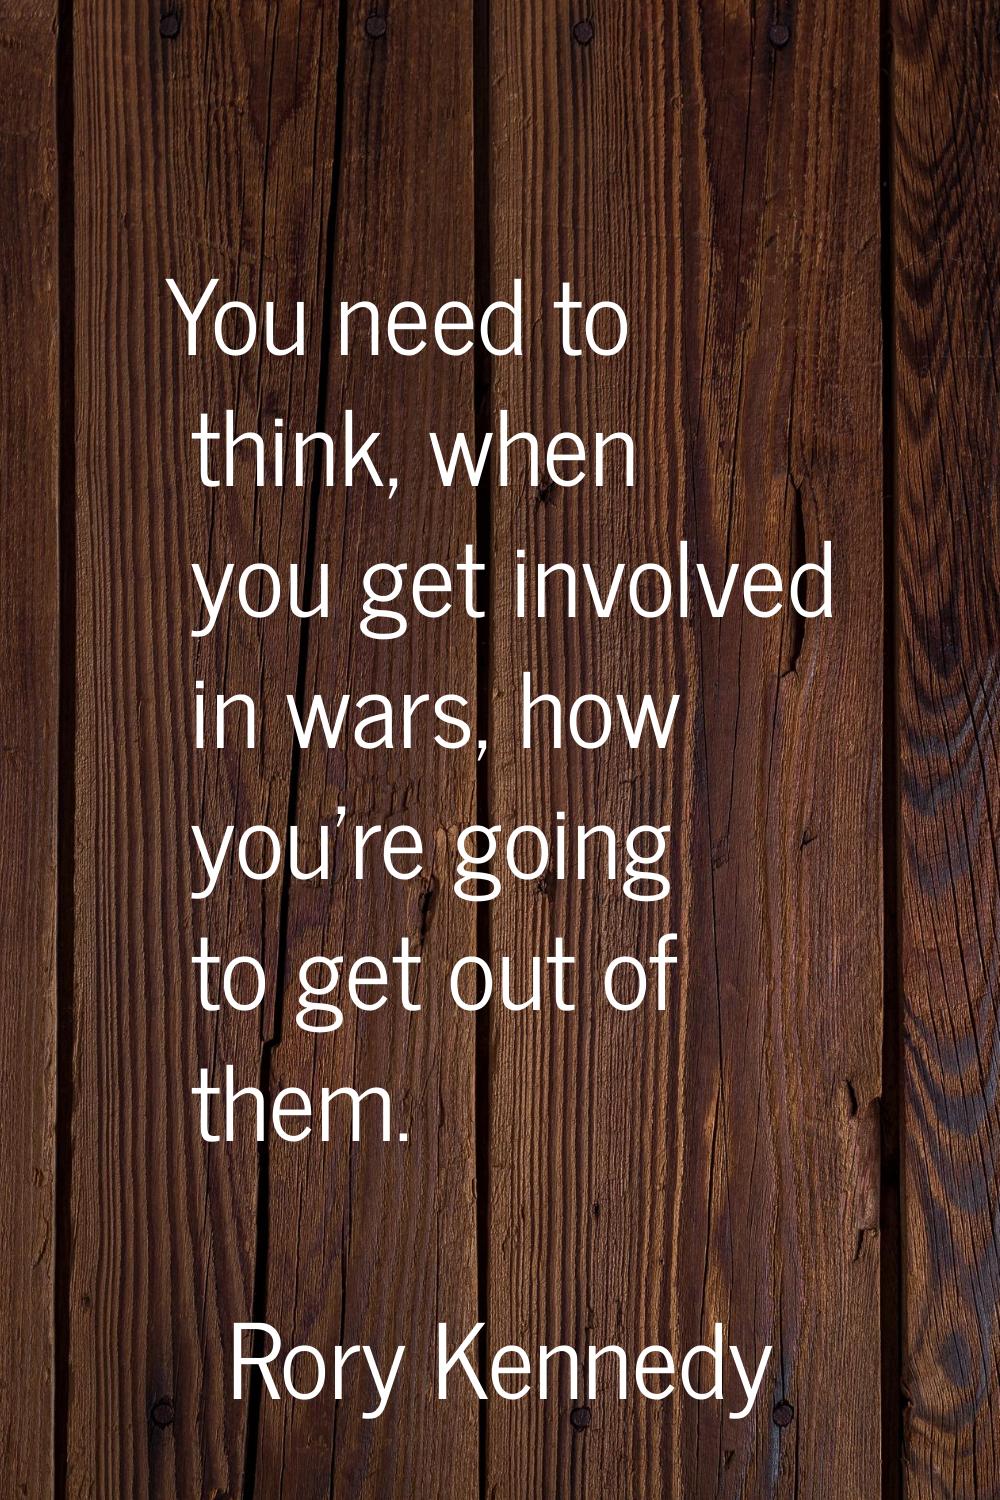 You need to think, when you get involved in wars, how you're going to get out of them.